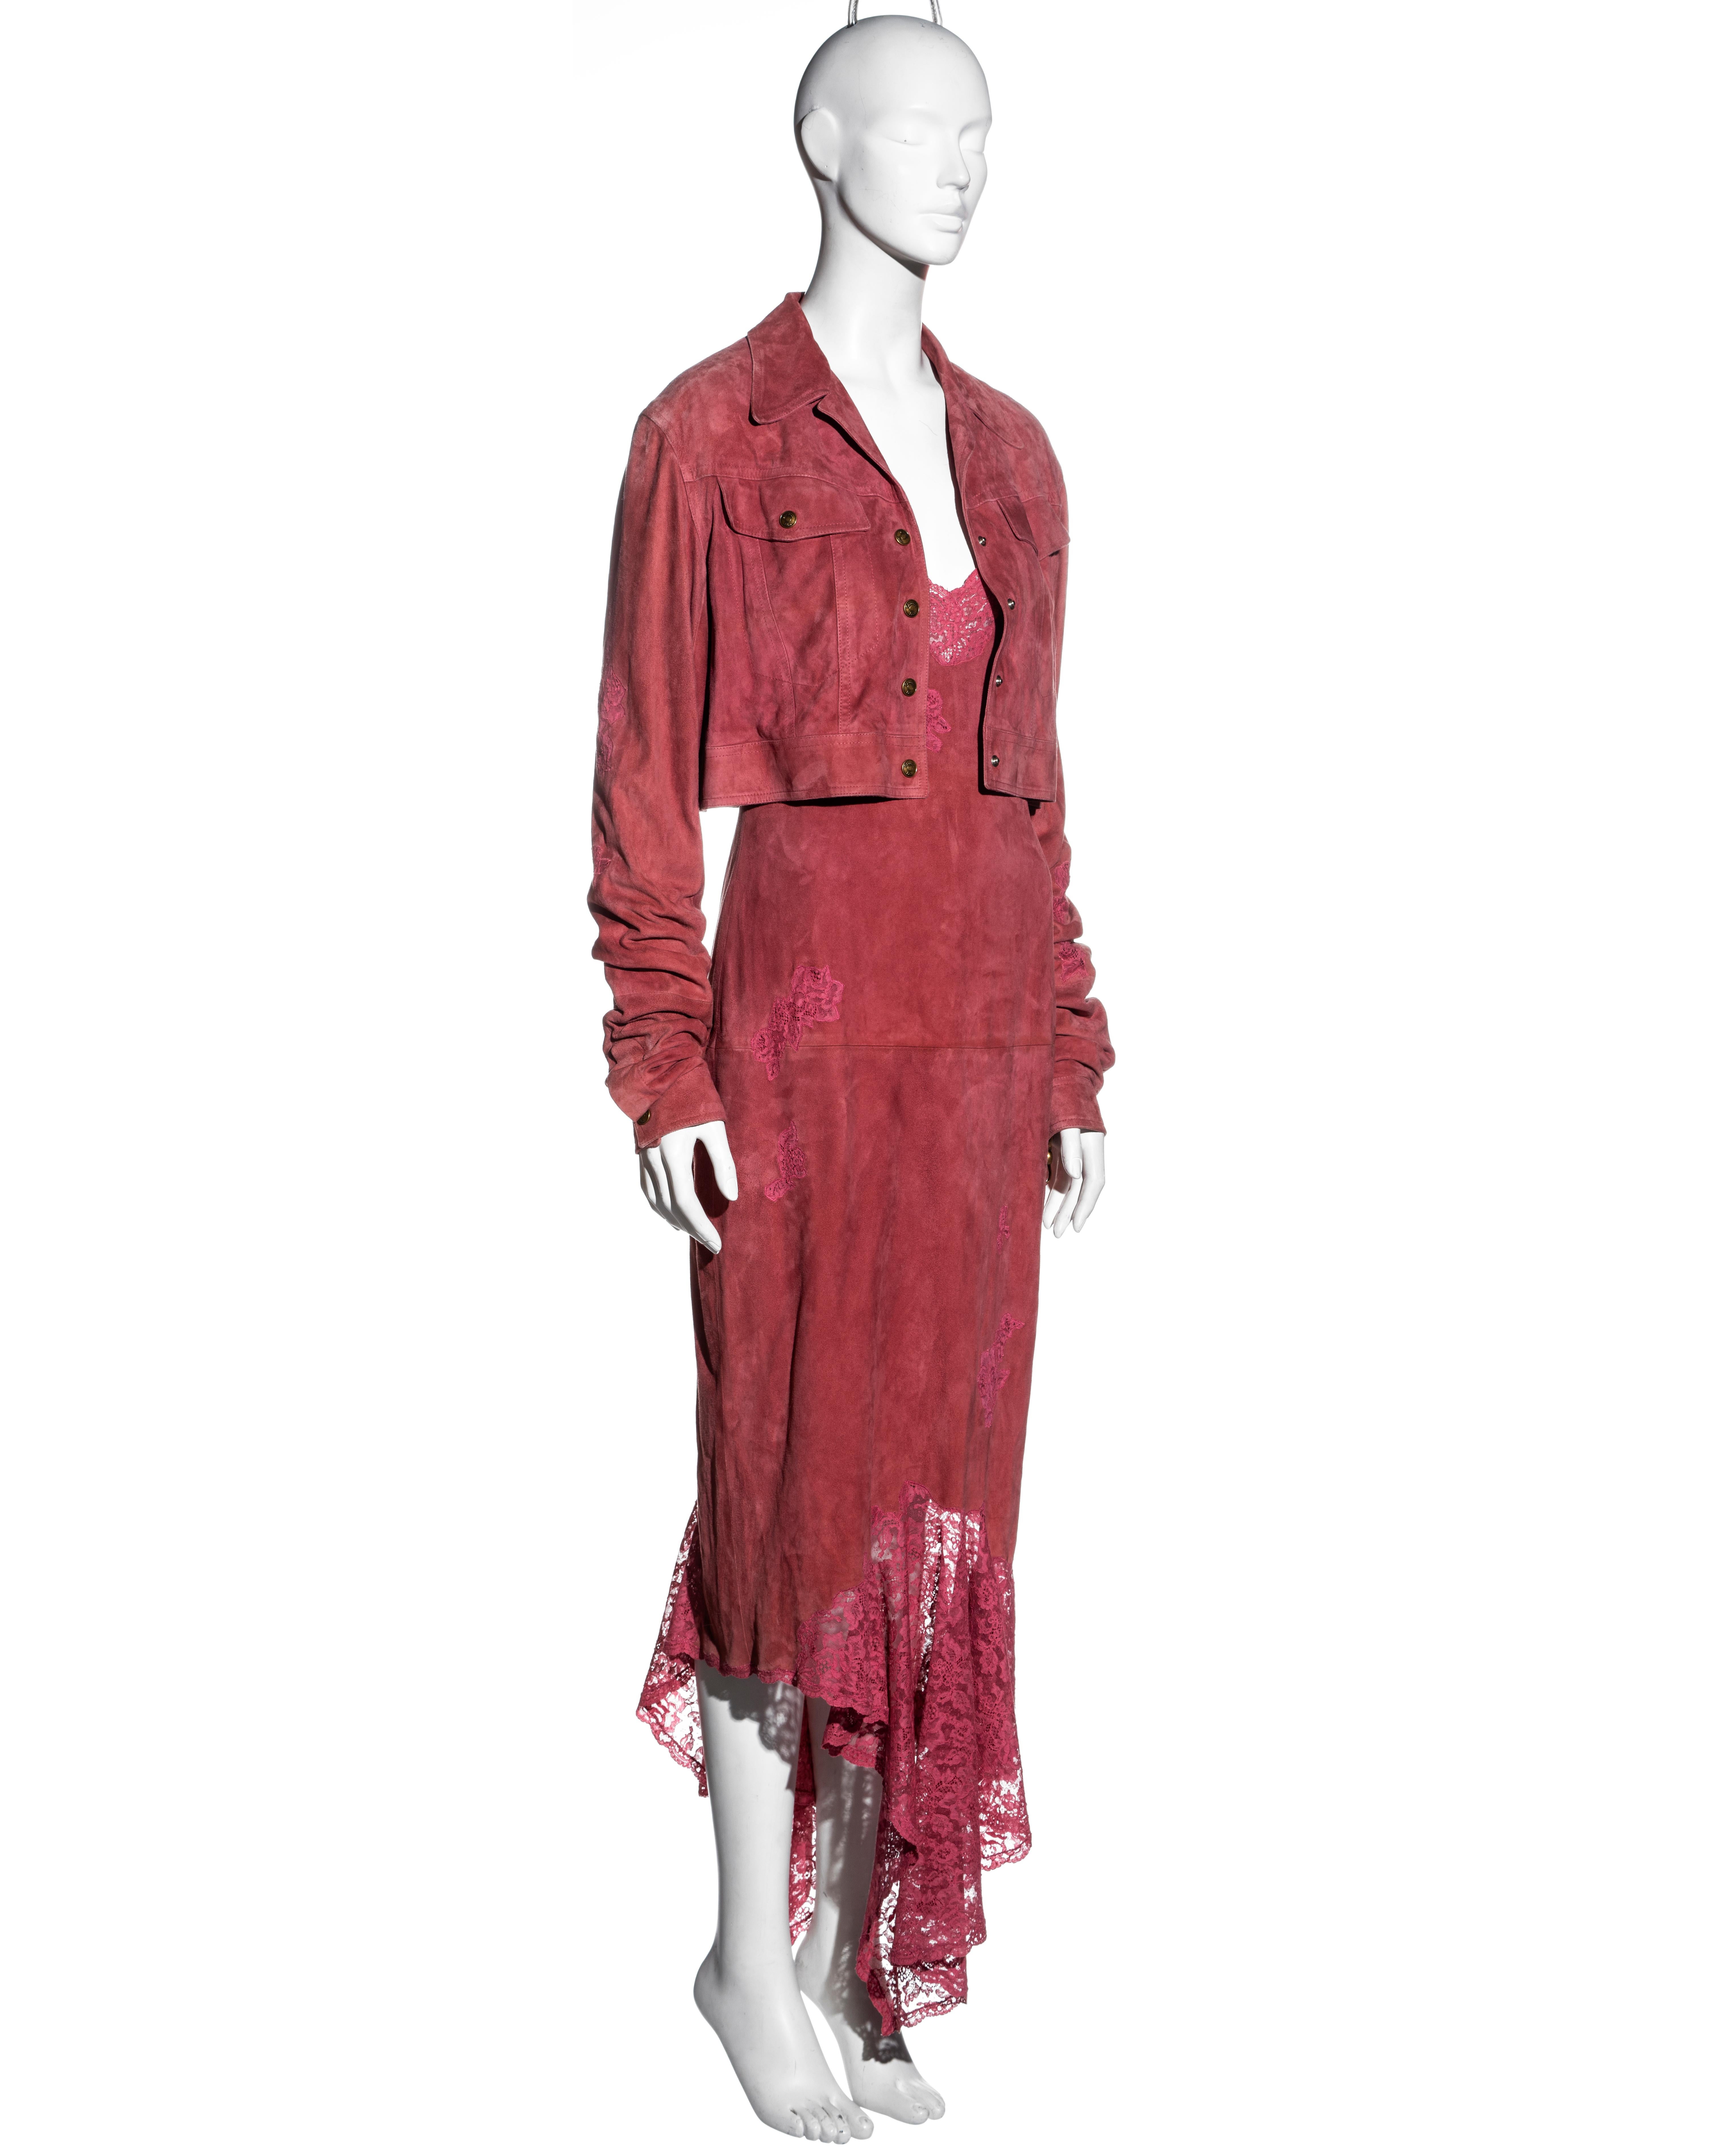 Women's Christian Dior by John Galliano pink suede and lace dress and jacket, fw 2000 For Sale